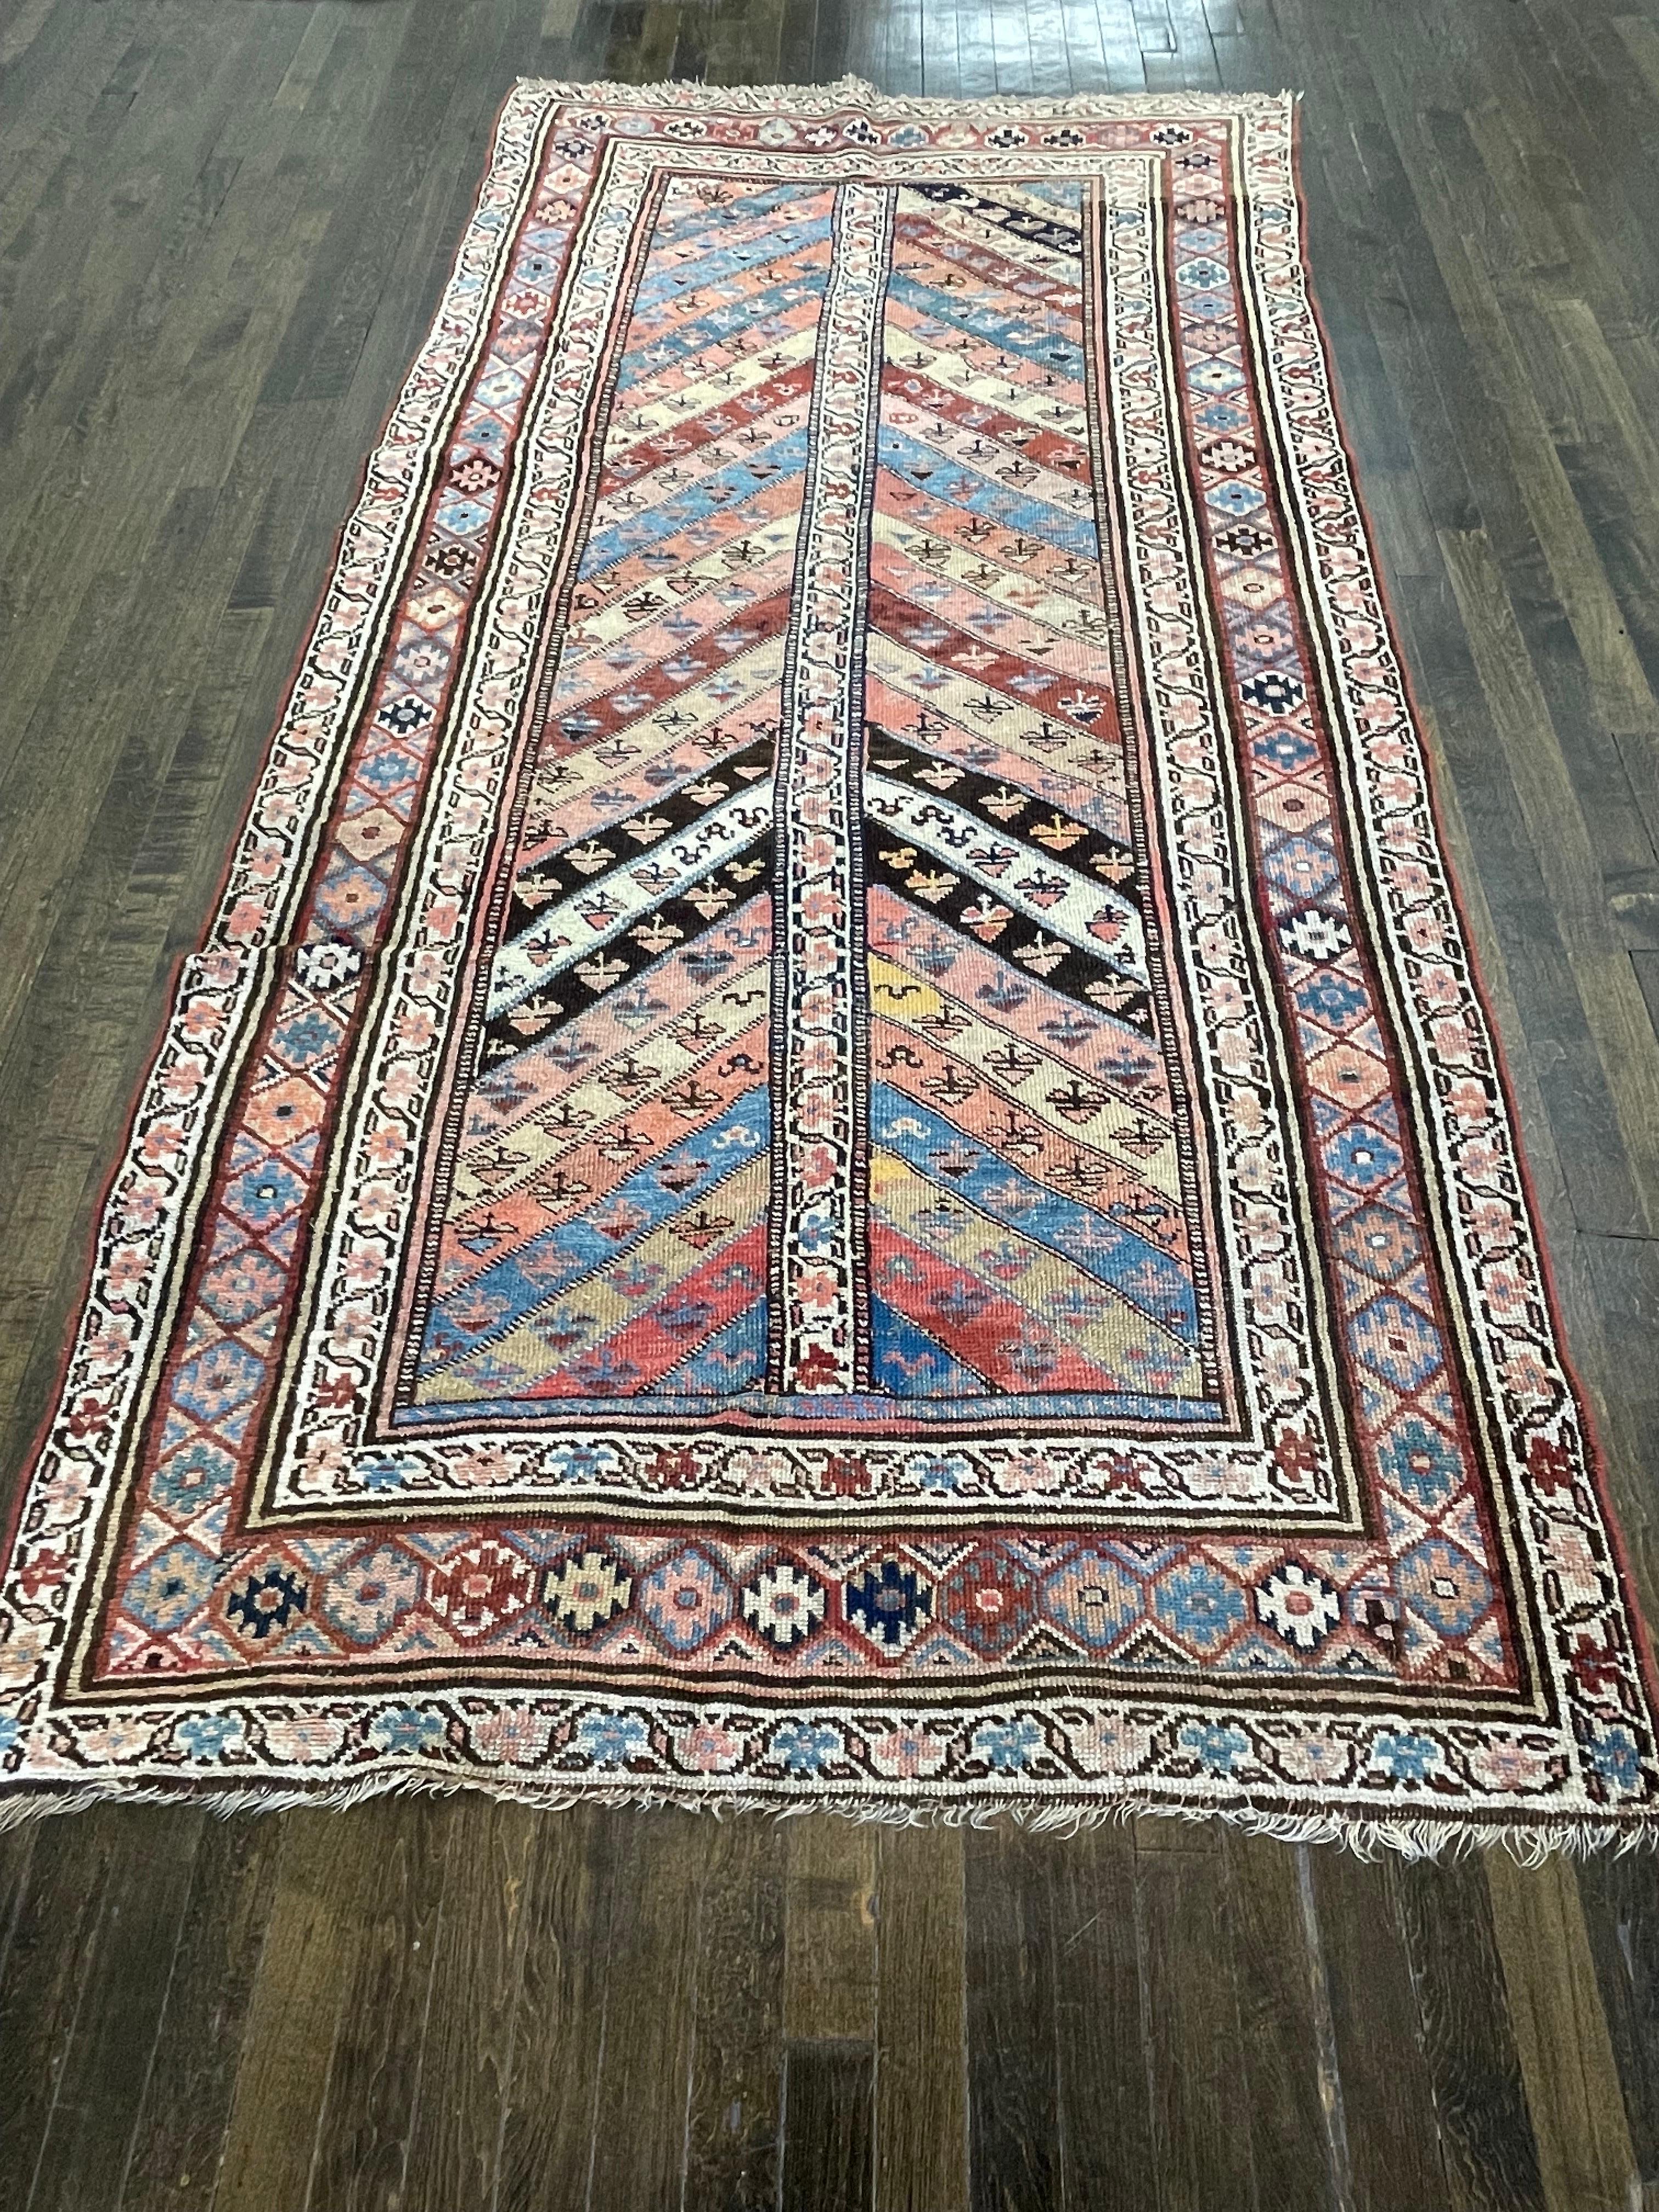 Handwoven in Kurdistan located in Iran's west ,this excellent example of Kurdish weaving is made in traditions of rug making of caucuses particularly of the Tallish region

Made with high quality wool that is dyed with all organic elements, this